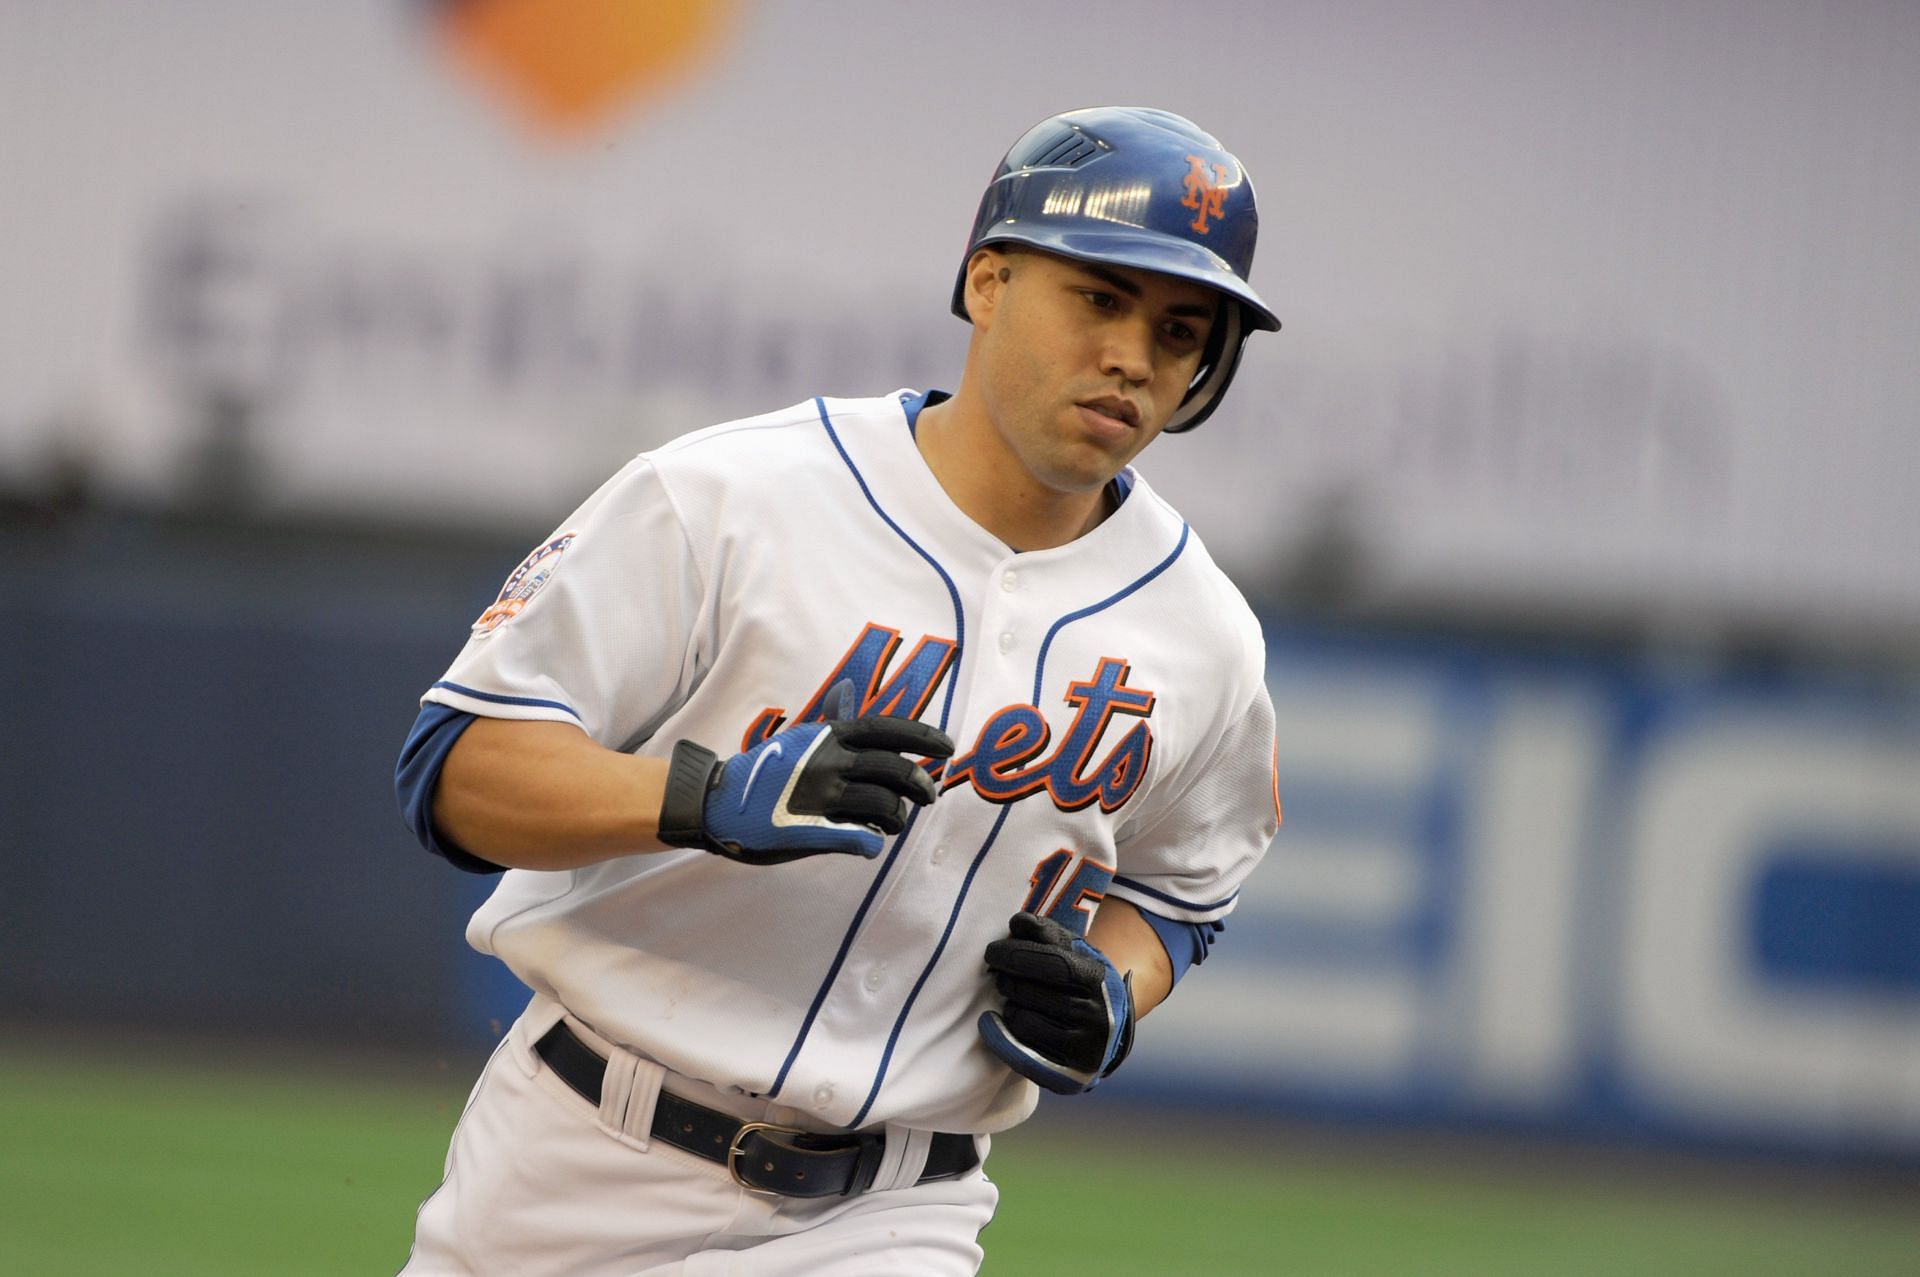 Carlos Beltran can apologize for Astros cheating with YES job